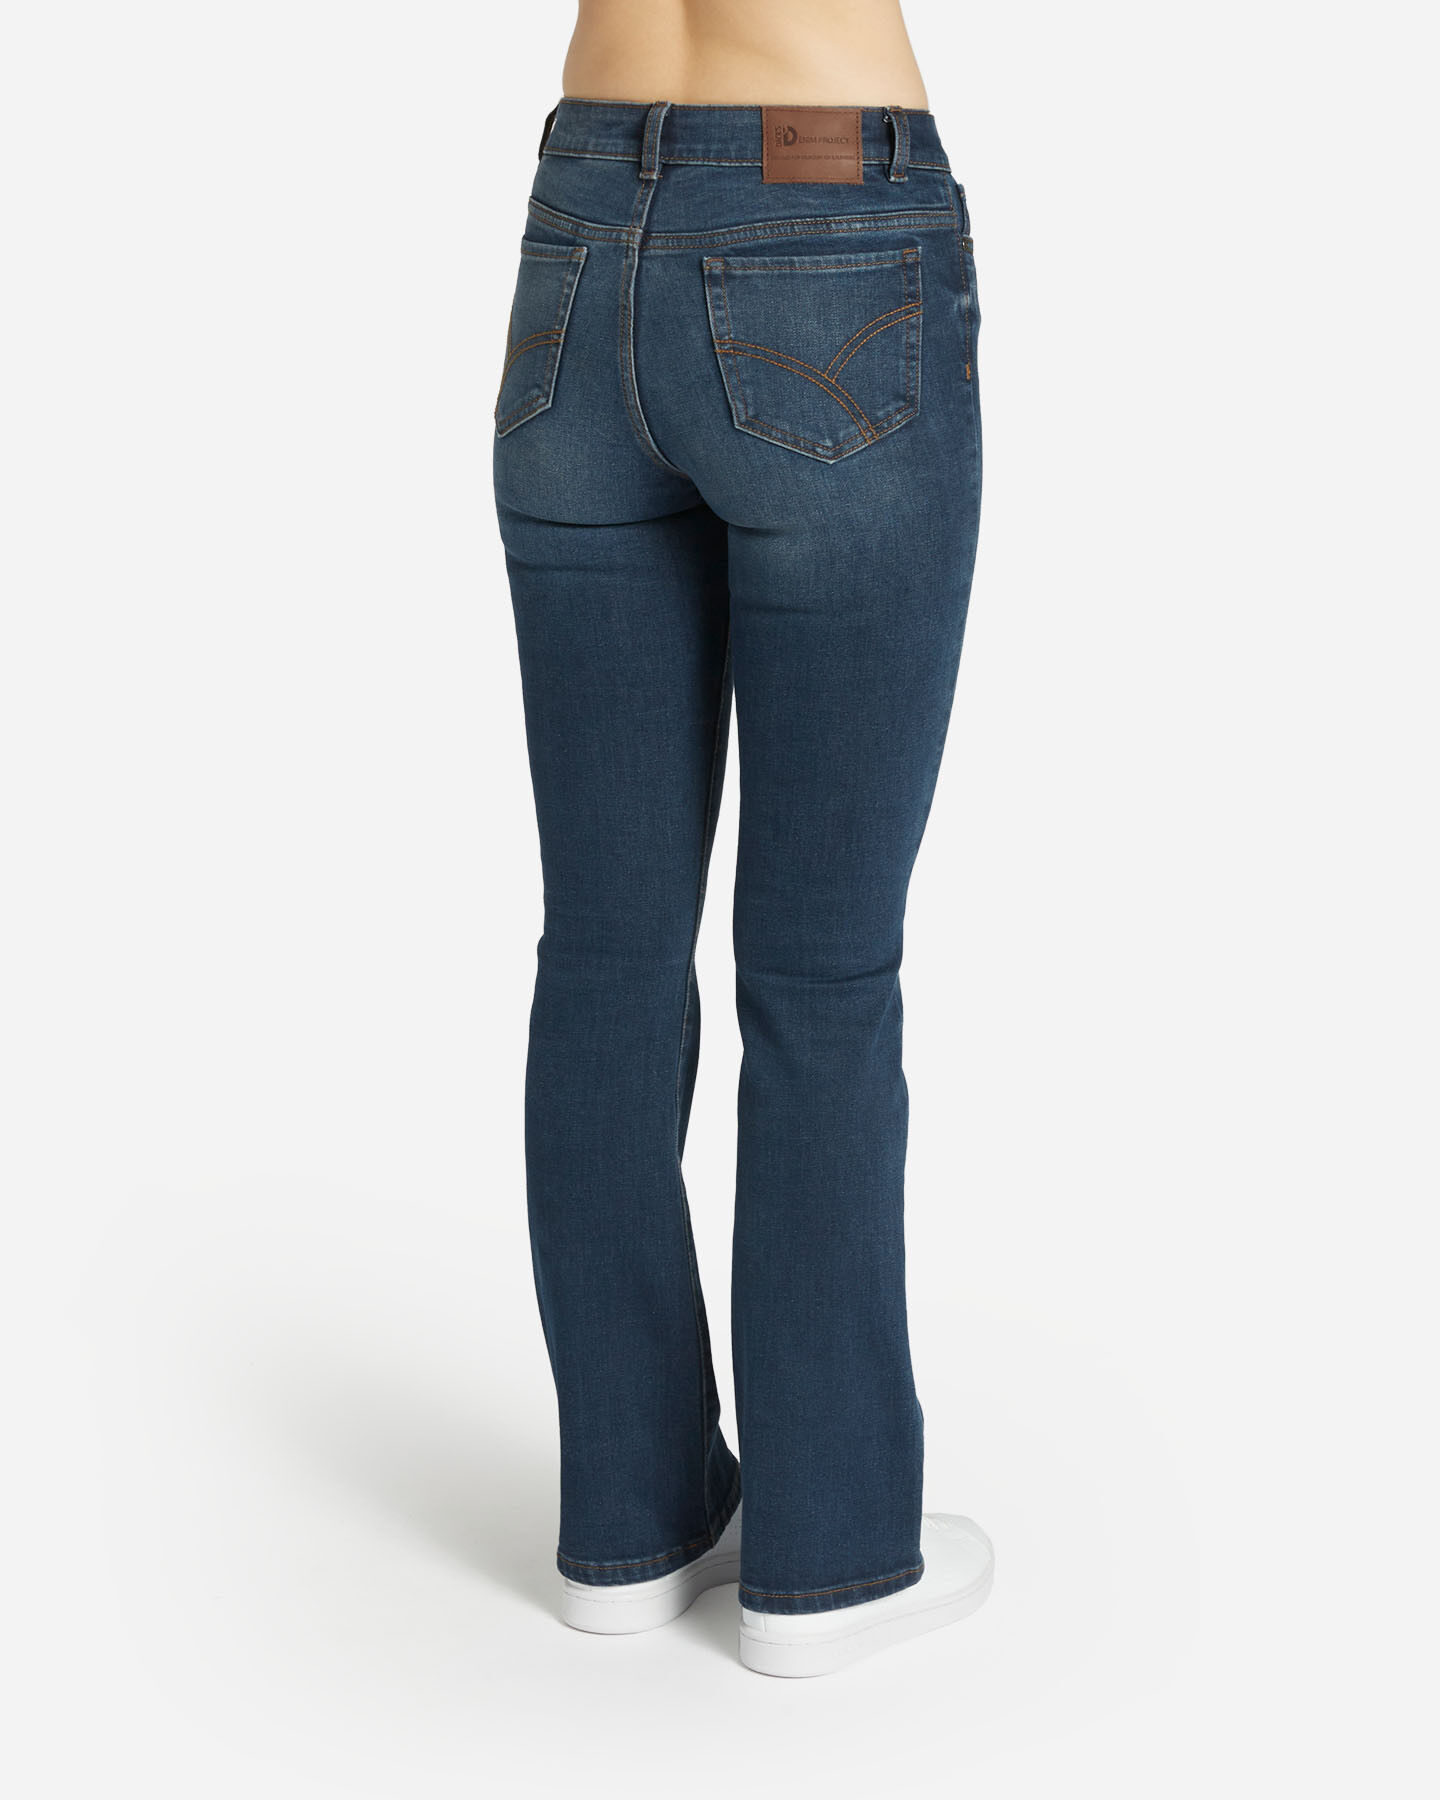  Jeans DACK'S DENIM PROJECT W S4124820|MD|40 scatto 1